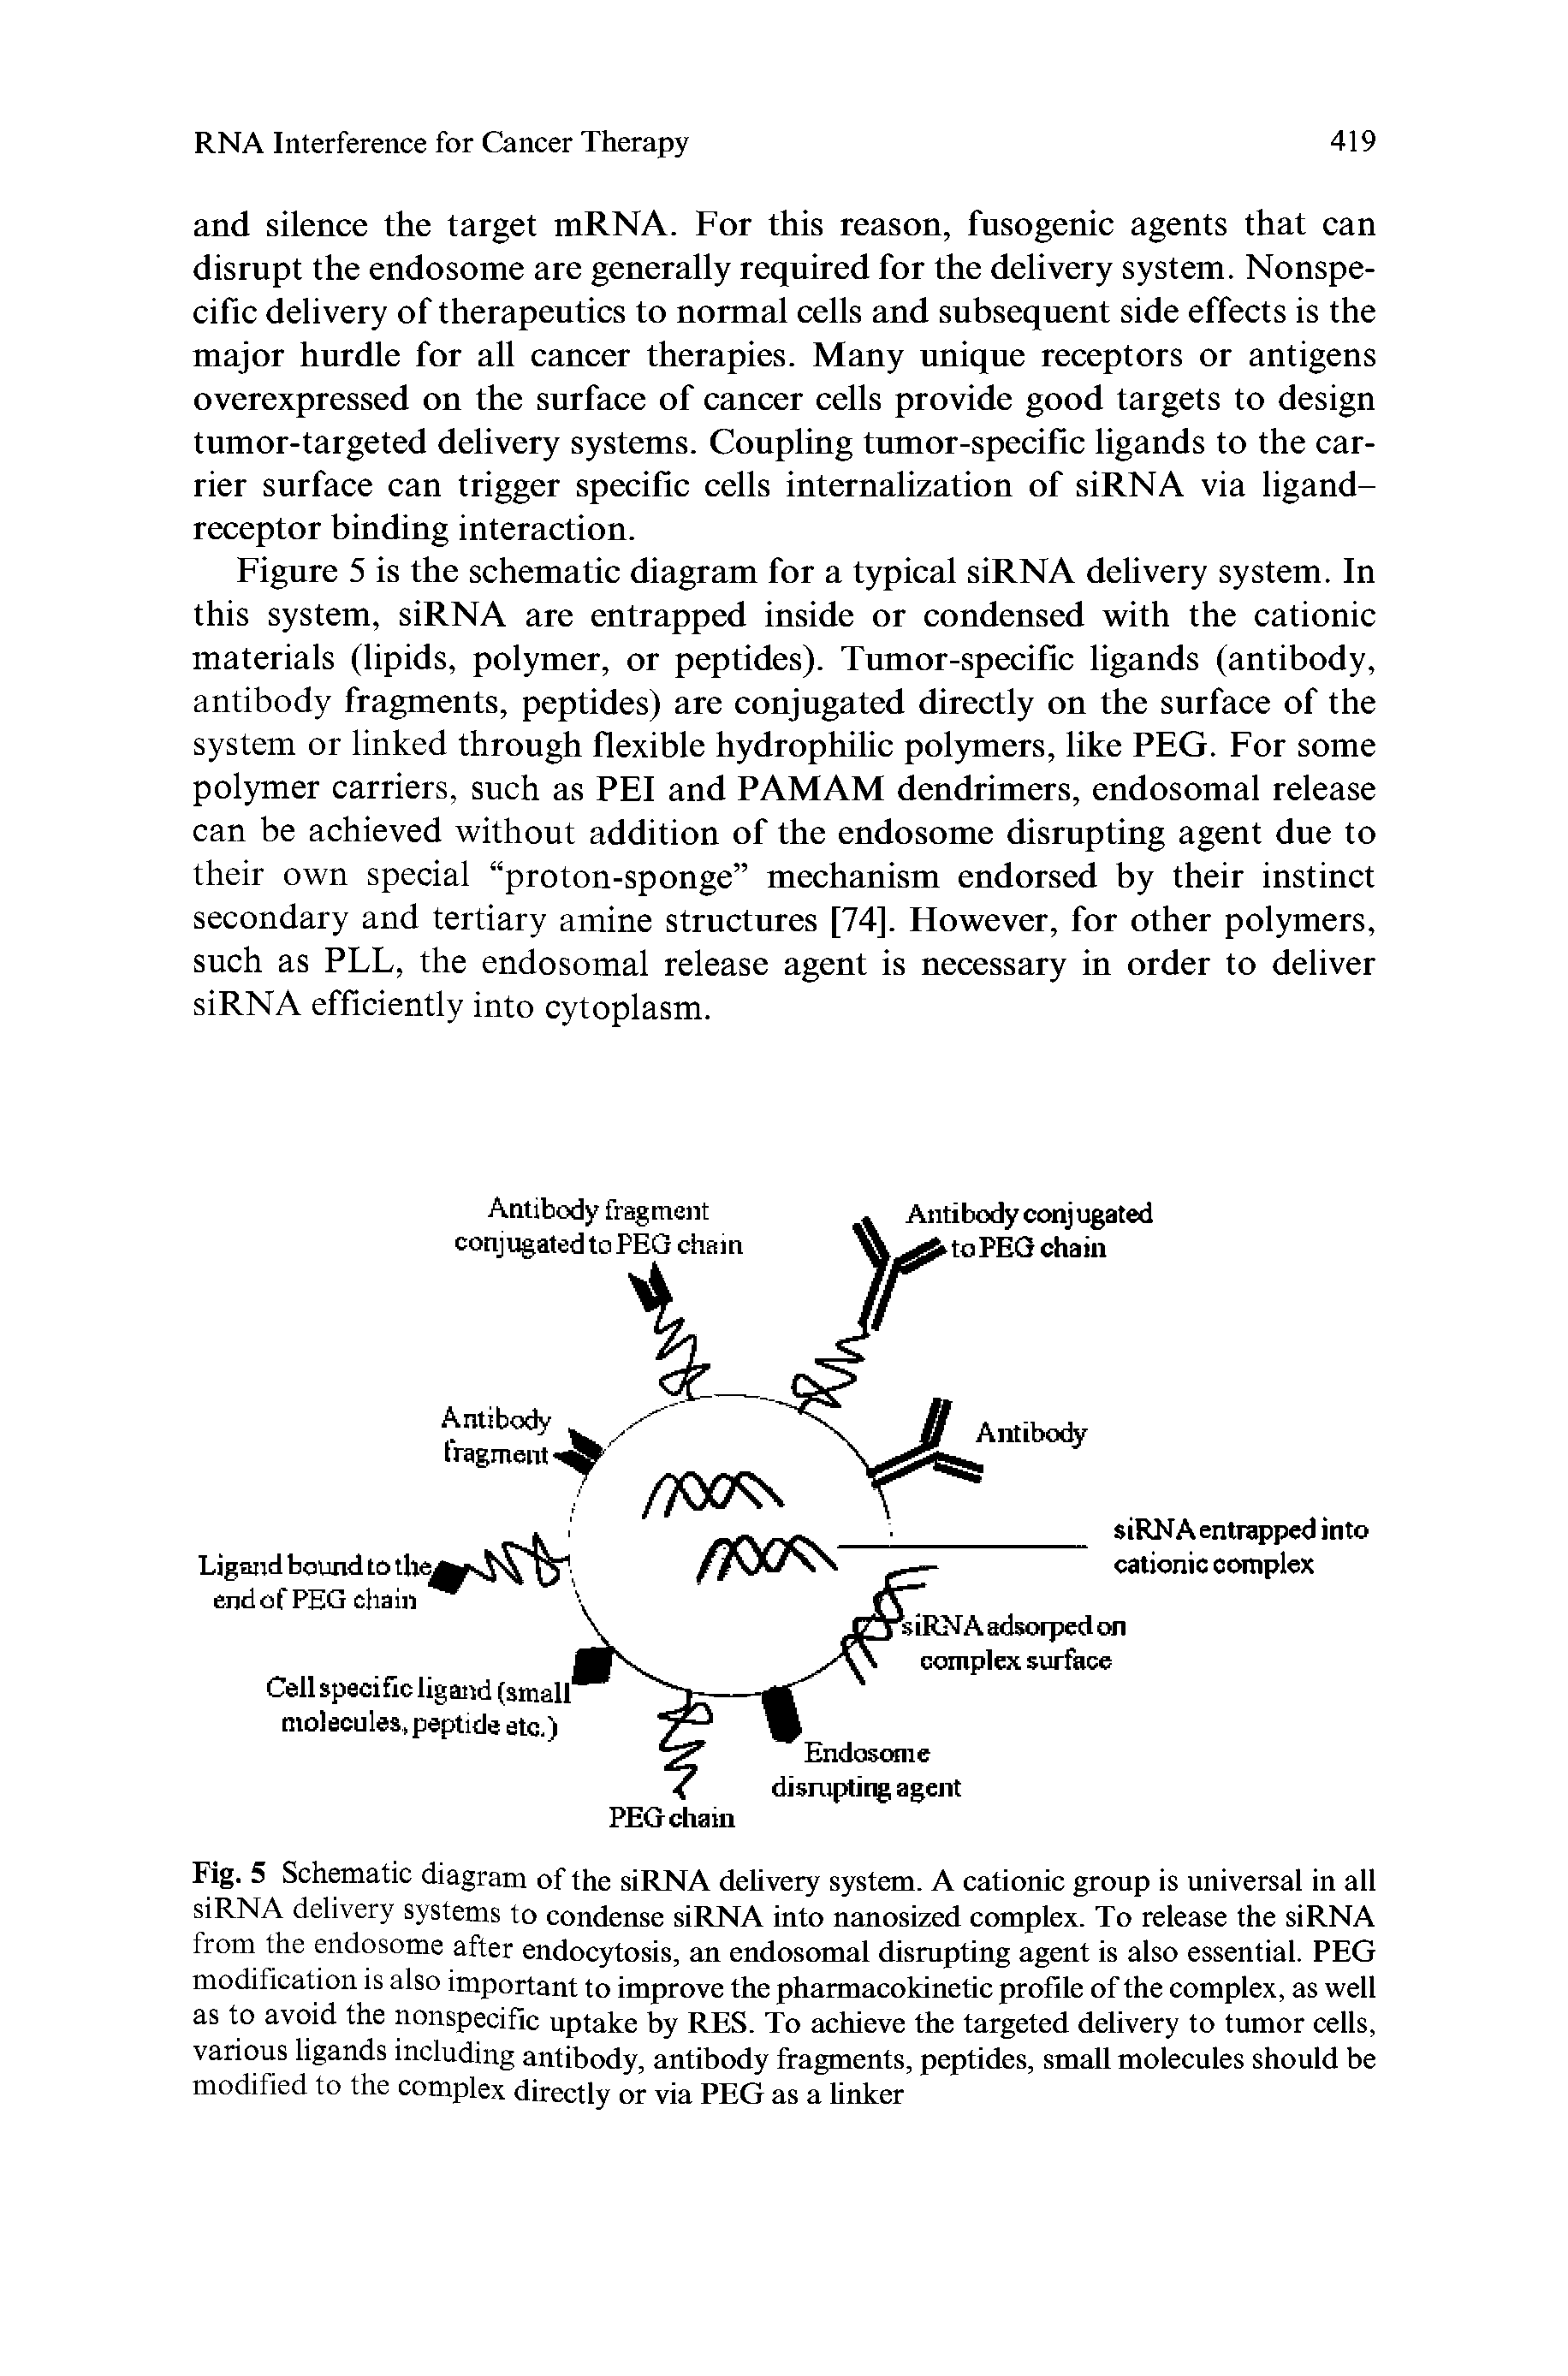 Fig. 5 Schematic diagram of the siRNA delivery system. A cationic group is universal in all siRNA delivery systems to condense siRNA into nanosized complex. To release the siRNA from the endosome after endocytosis, an endosomal disrupting agent is also essential. PEG modification is also important to improve the pharmacokinetic profile of the complex, as well as to avoid the nonspecific uptake by RES. To achieve the targeted delivery to tumor cells, various ligands including antibody, antibody fragments, peptides, small molecules should be modified to the complex directly or via PEG as a linker...